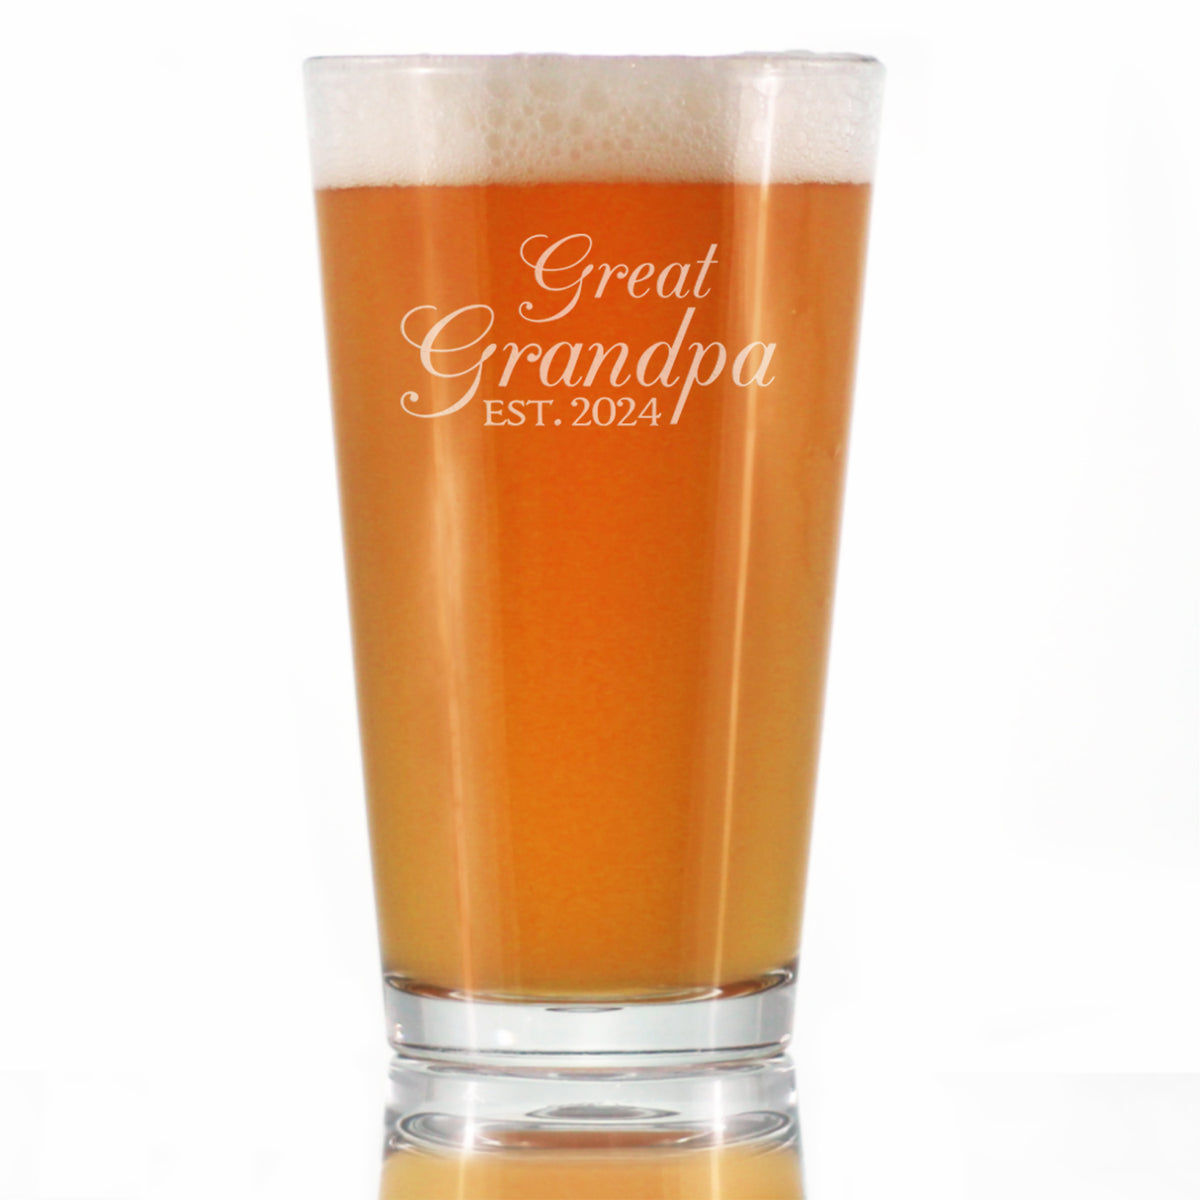 Great Grandpa Est 2024 - New Great Grandfather Pint Glass Gift for First Time Great Grandparents - Decorative 16 Oz Glasses